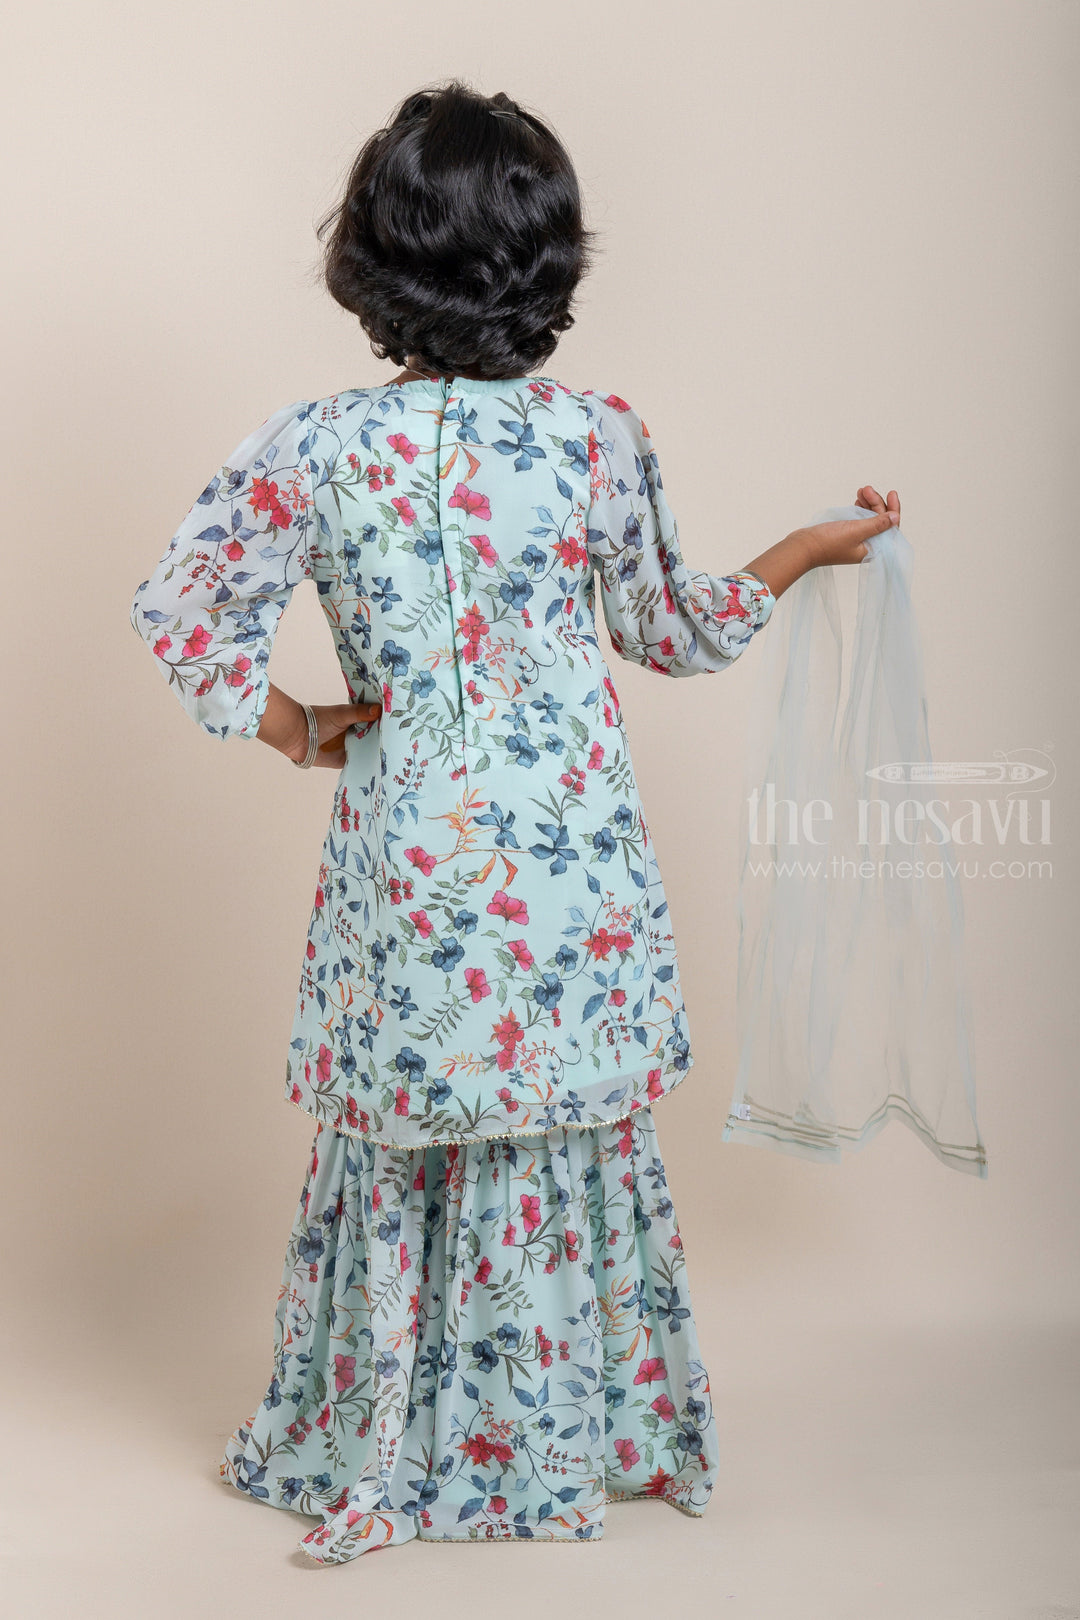 The Nesavu Sets & Suits Glitter Sequin Embroidered Floral Printed Turquoise Blue Kurti and Palazzo Suit for Girls with Organza Dupatta psr silks Nesavu